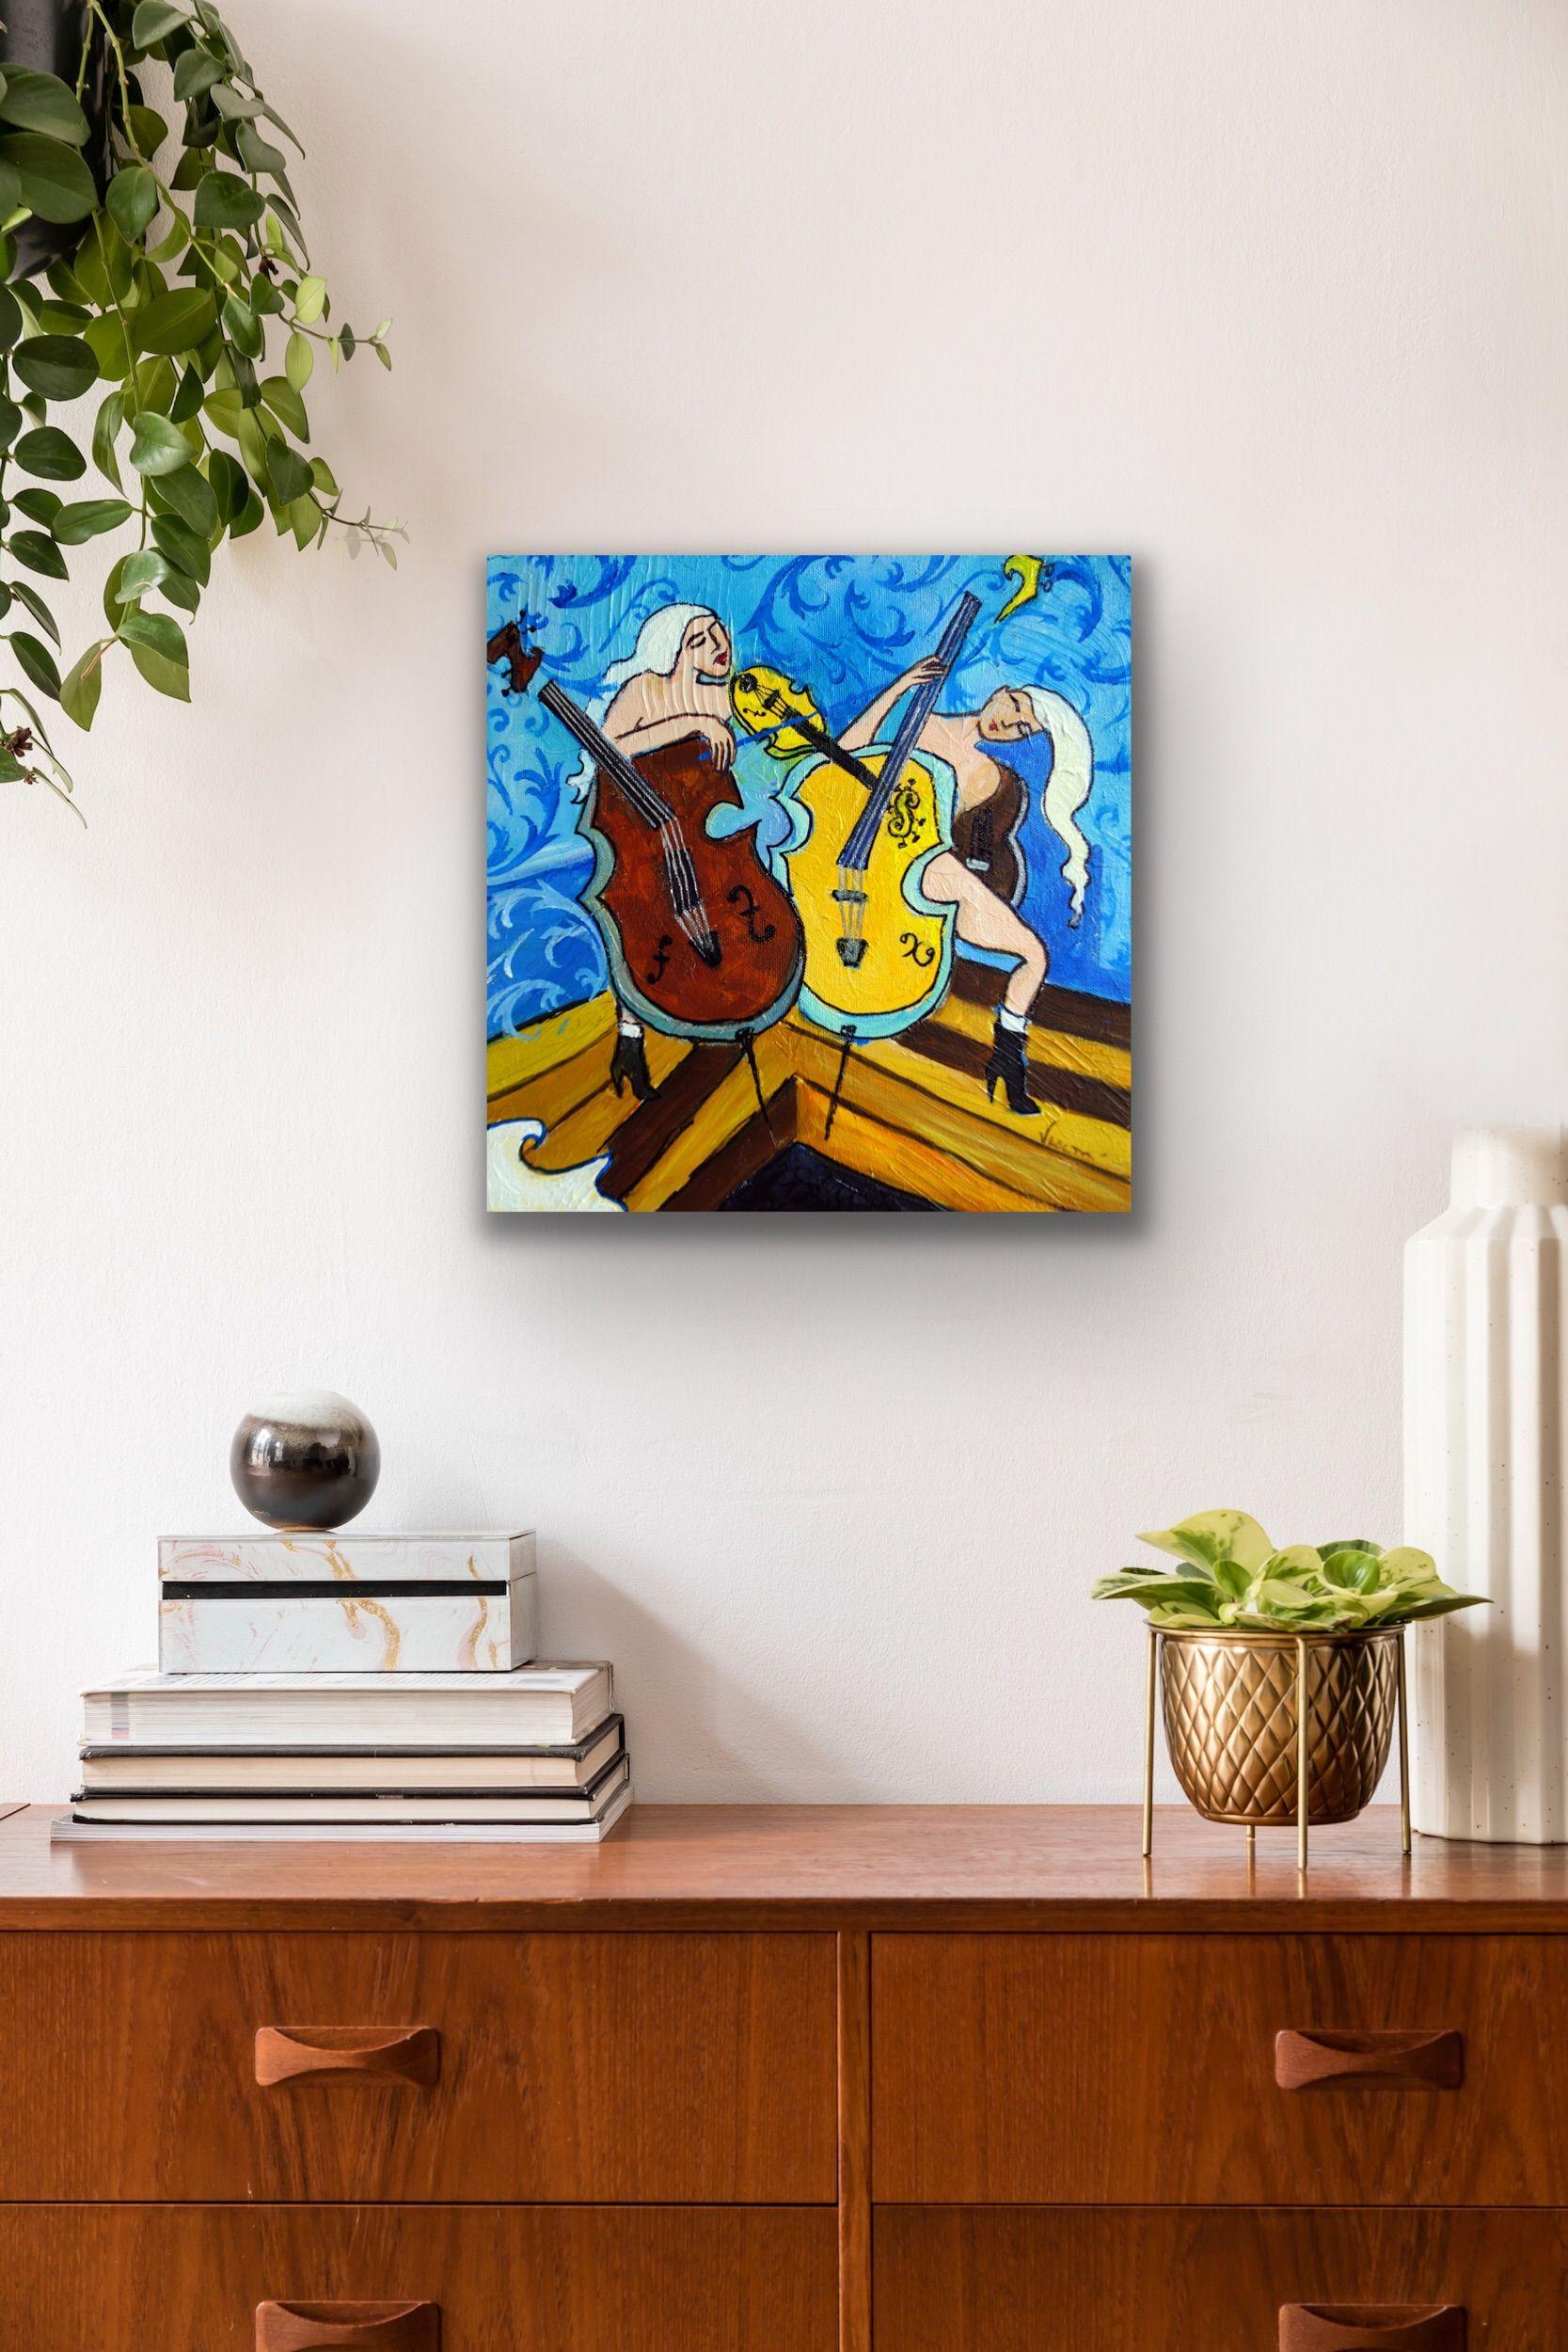 My cellists dueling it out deconstructing into their music and instruments. The wear only boots and the warm colors of their cellos look delicious with that cool blue background that has stenciled patterns. 12x12x1.25 inches oil on textured canvas,